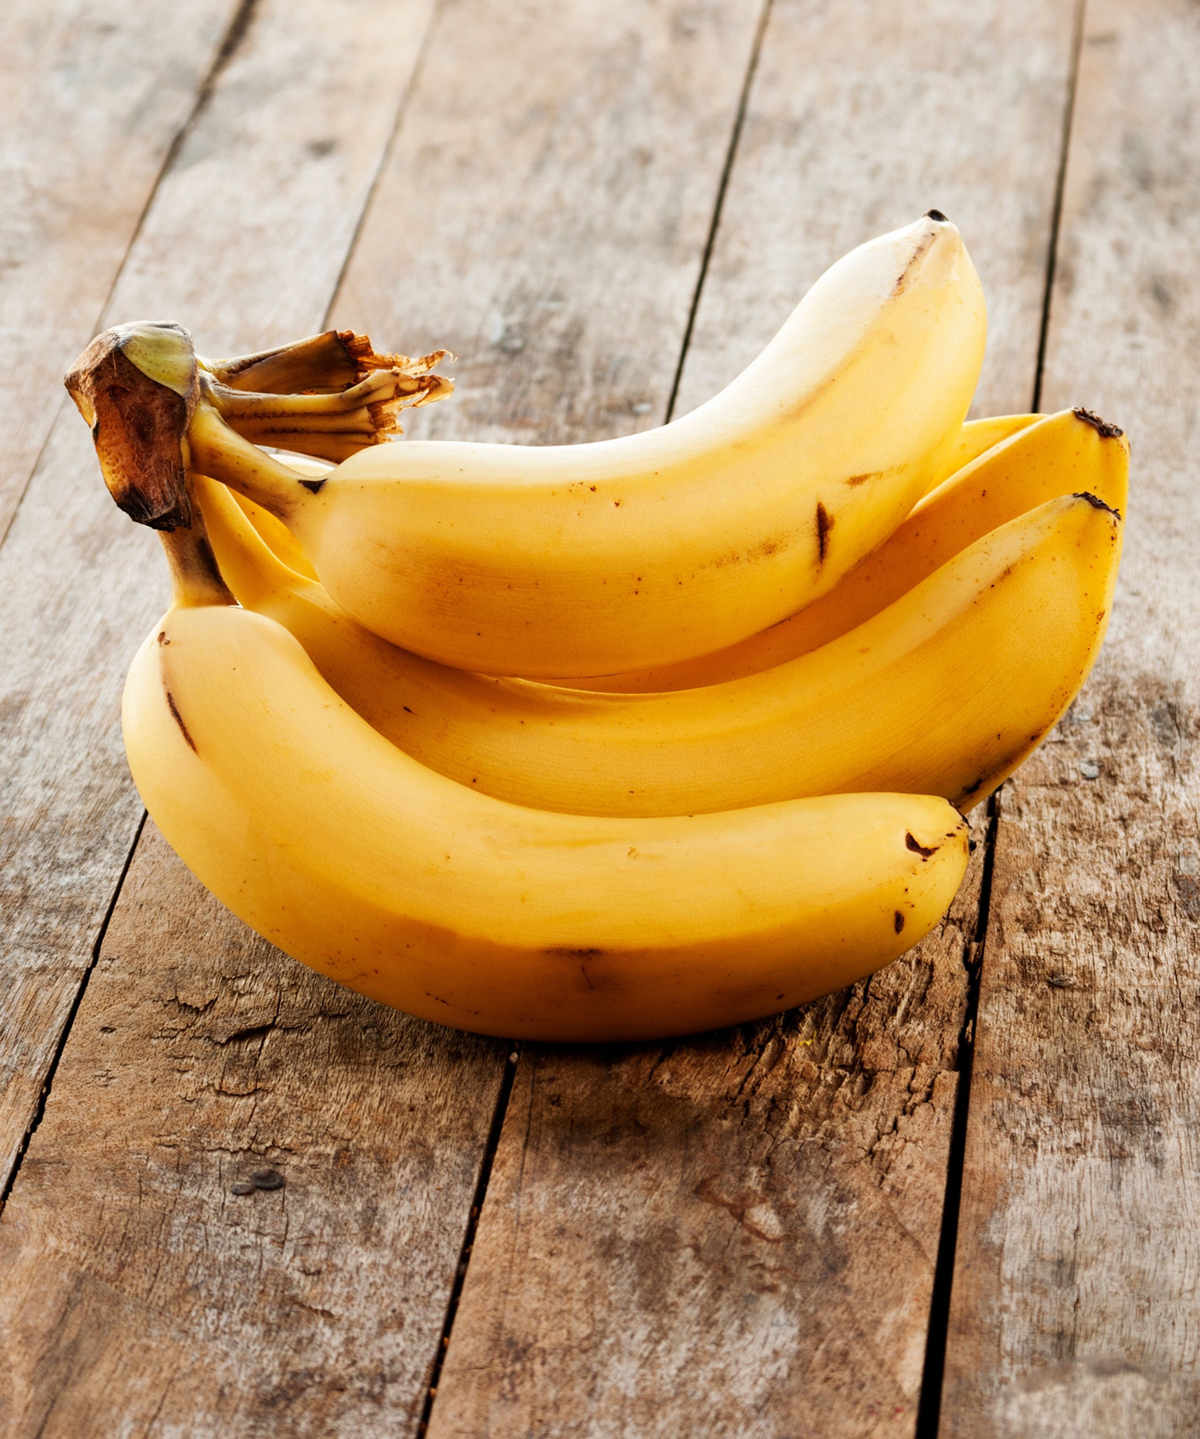 How to choose ripe bananas for babies.